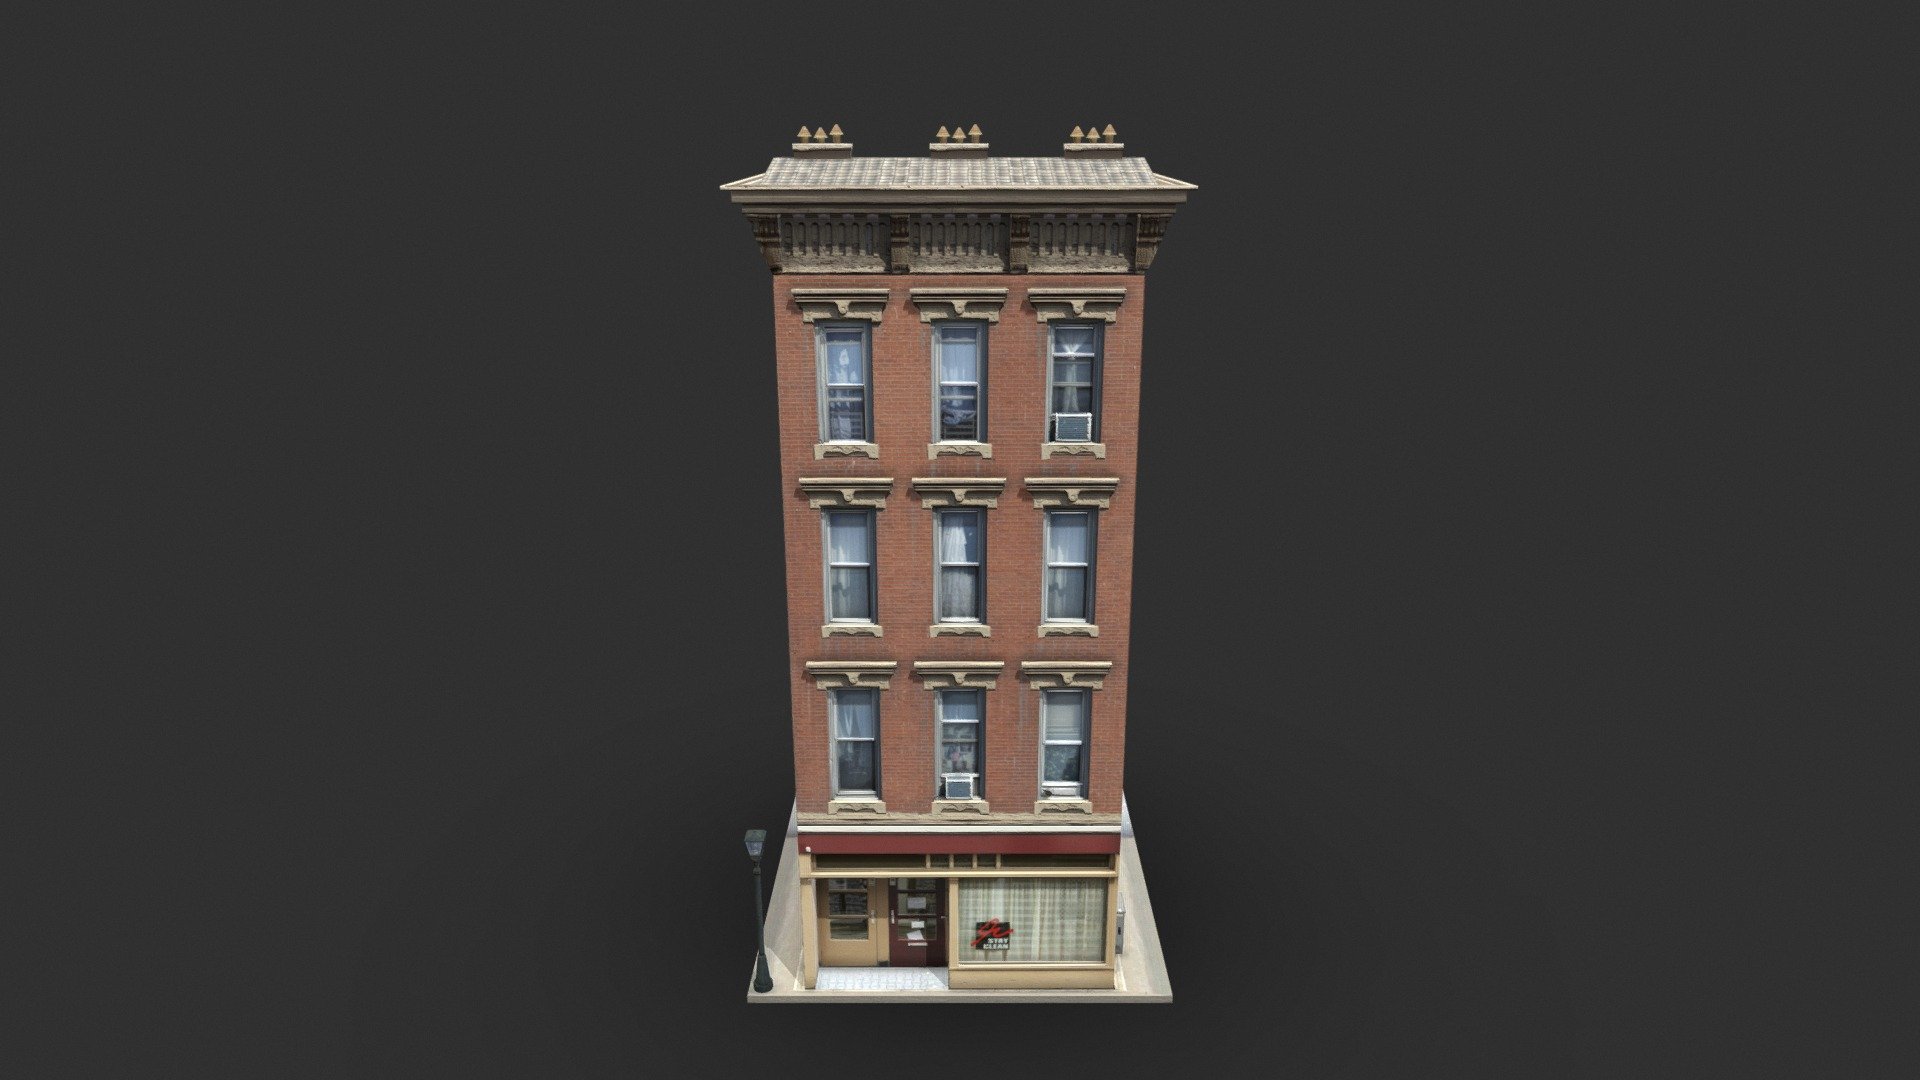 3D model of Old Apartment House
- Resolution of textures: 3000x3000, 4096x2048 +extra
- Originally created with 3ds Max 2017
- Photorealistic Texture
- Unit system is set to centimetre.
- Model is built to real-world scale Rendered in Vray and
- Special notes: .fbx format is recommended for import in other 3d software. If your software doesn't support .fbx format, please use .3ds format; .obj, format was exported from 3ds Max 3d model